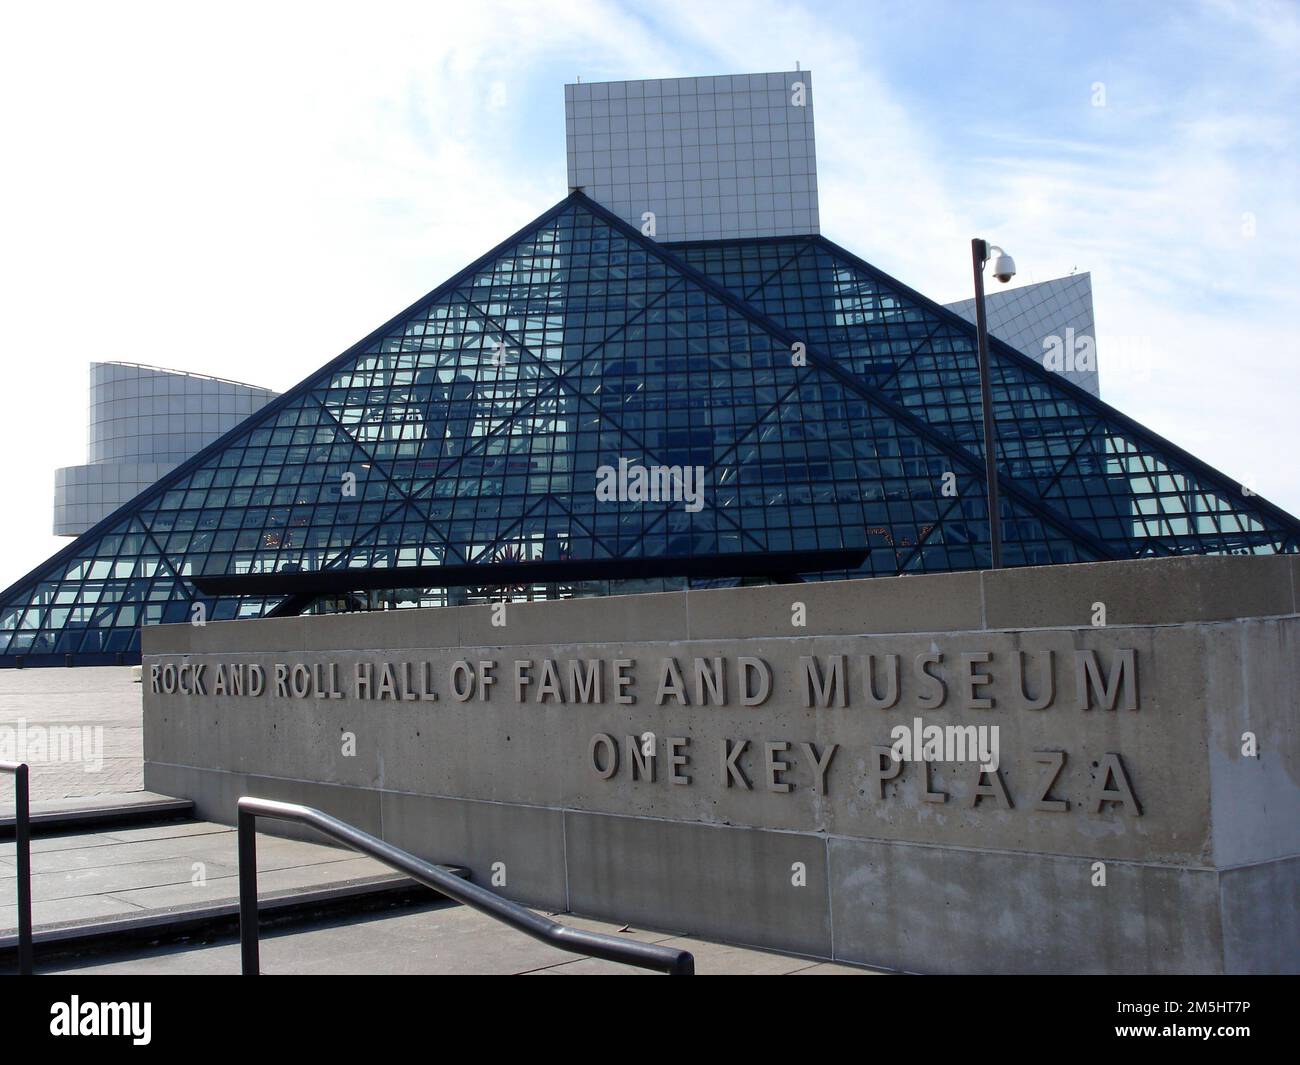 Ohio & Erie Canalway - Rock and Roll Hall of Fame and Museum. Designed by I.M. Pei, the Rock Hall is just as impressive outside as the exhibits inside. Its glass and steel pyramidal shape is flanked by rectangular white walls. Location: Cleveland, Ohio (41.509° N 81.695° W) Stock Photo